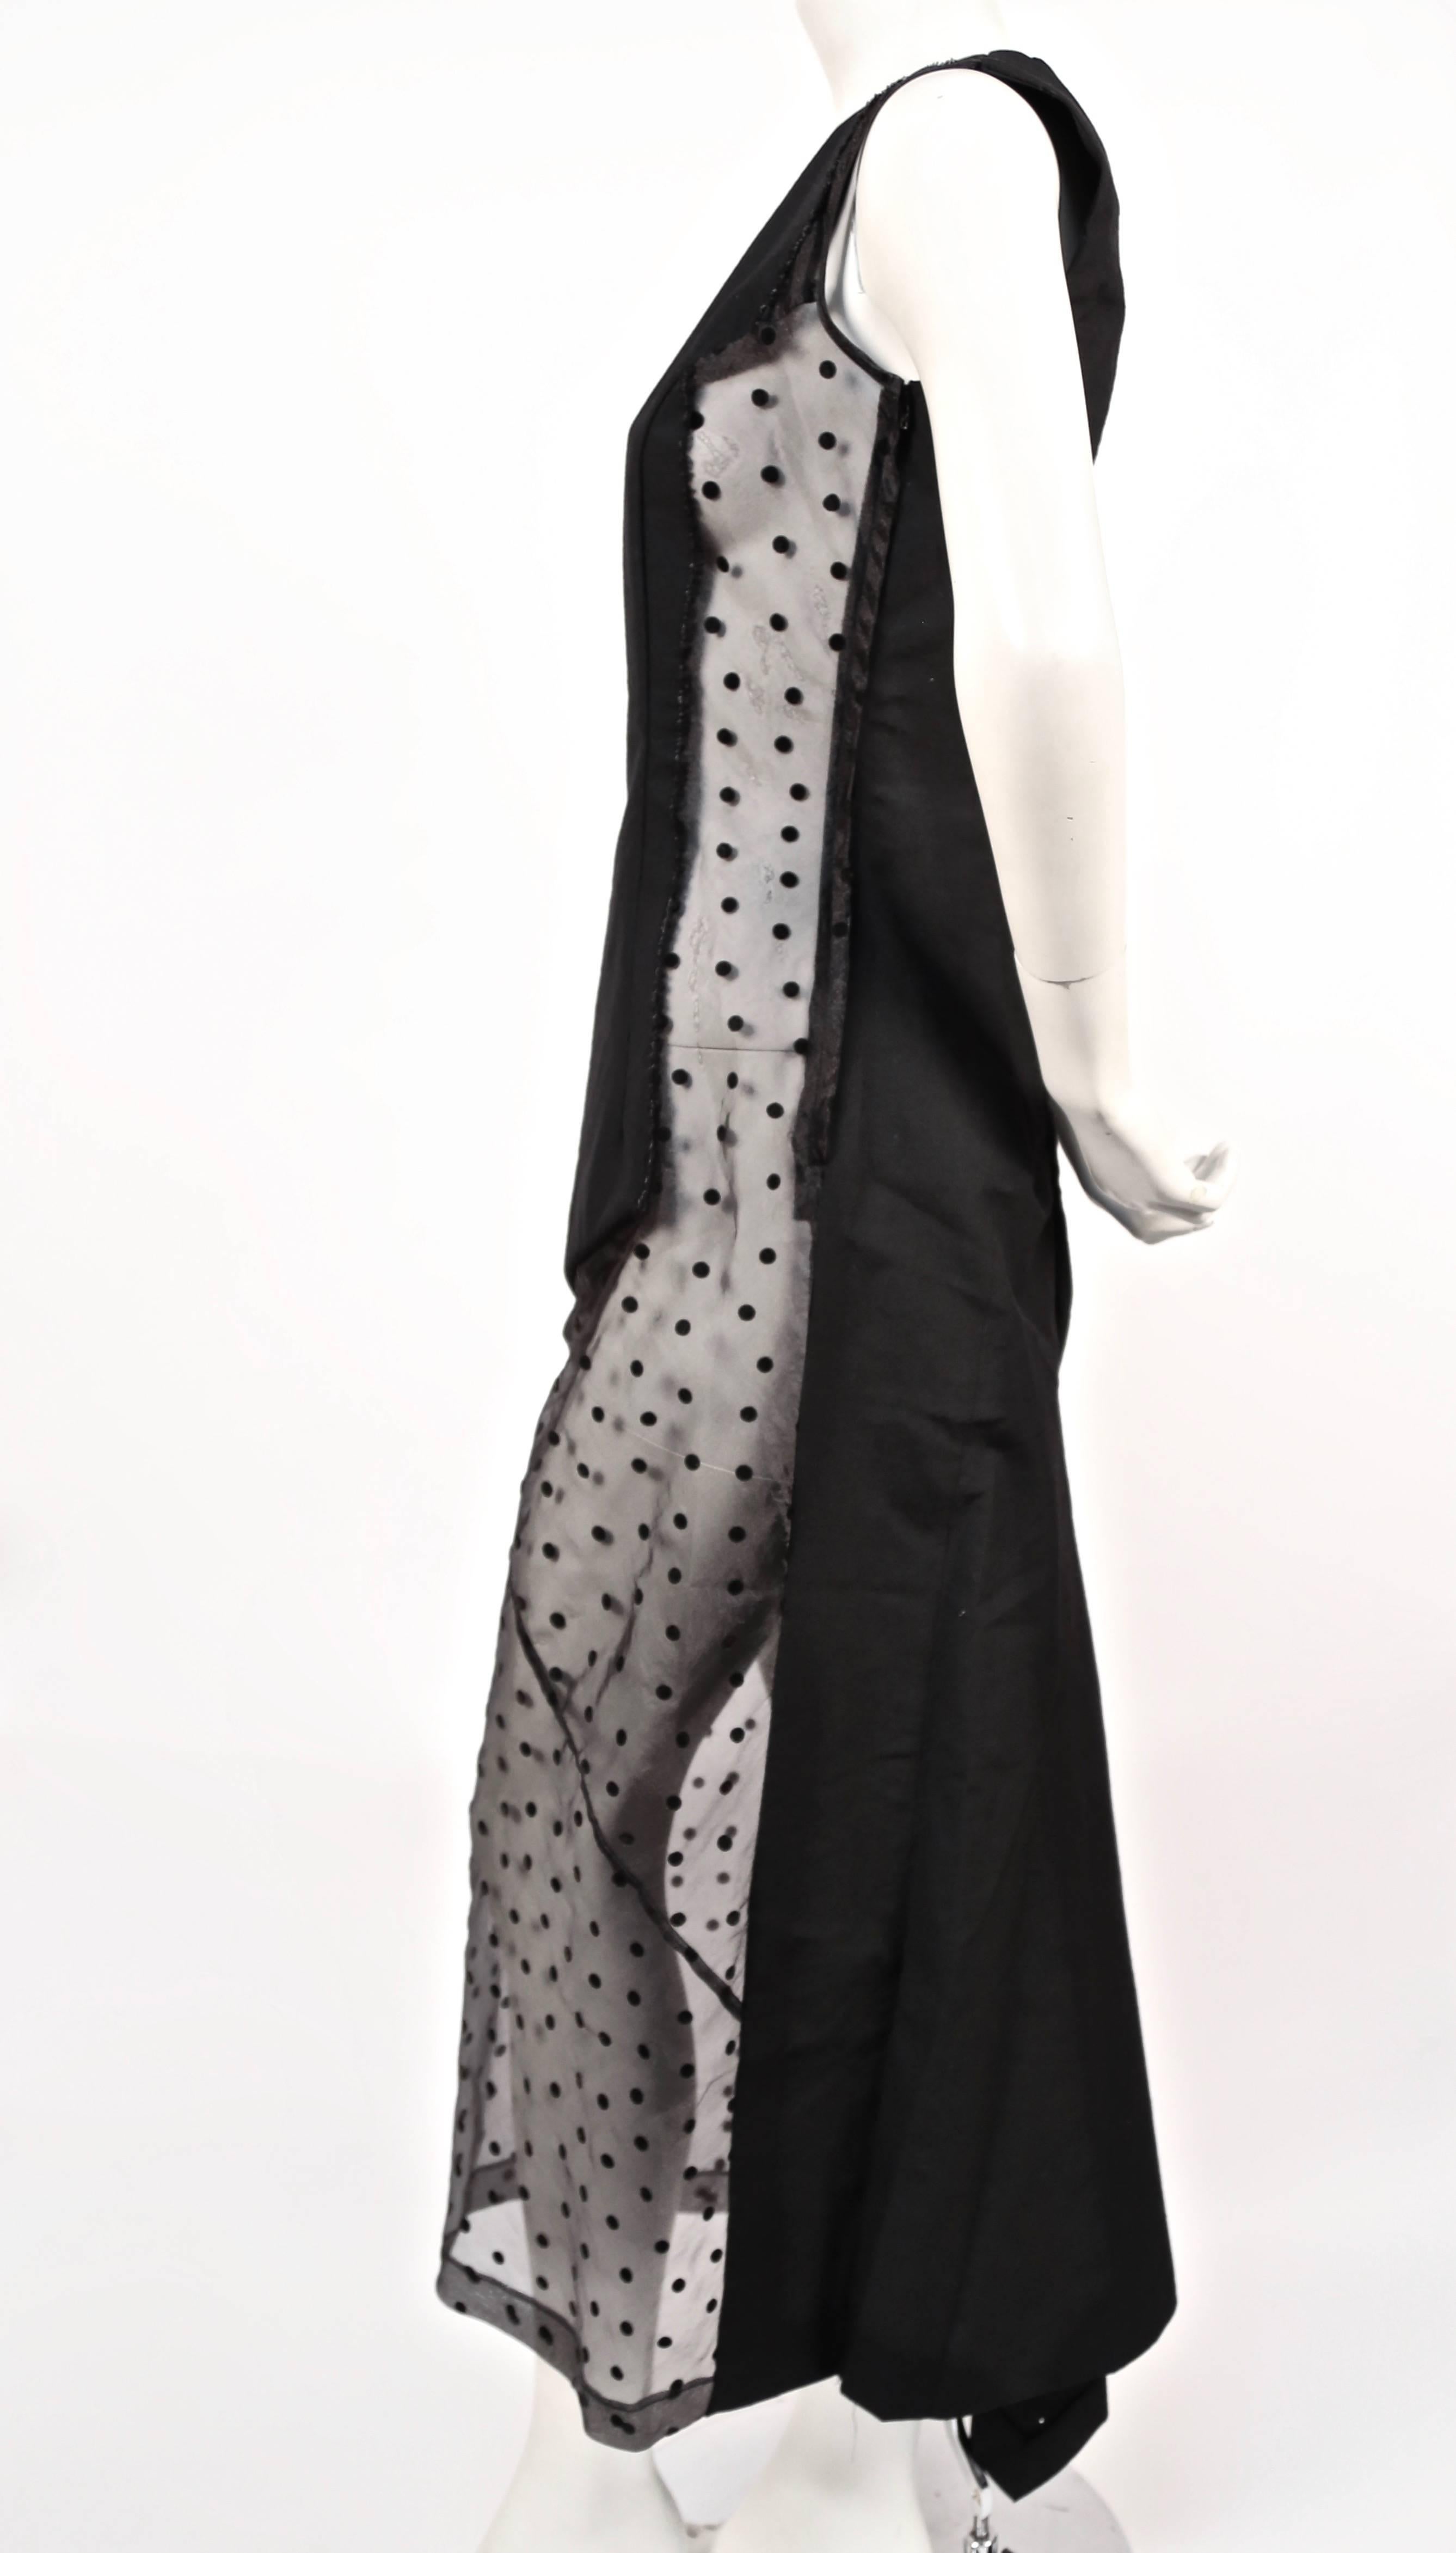 Very rare black paneled dress with sheer black dotted tulle inserts and fishtail hemline from Comme Des Garcons dating to fall of 1997 as seen on the runway. Size 'M'. Approximate measurements: bust 34.5", waist 29.5", hips 37" and